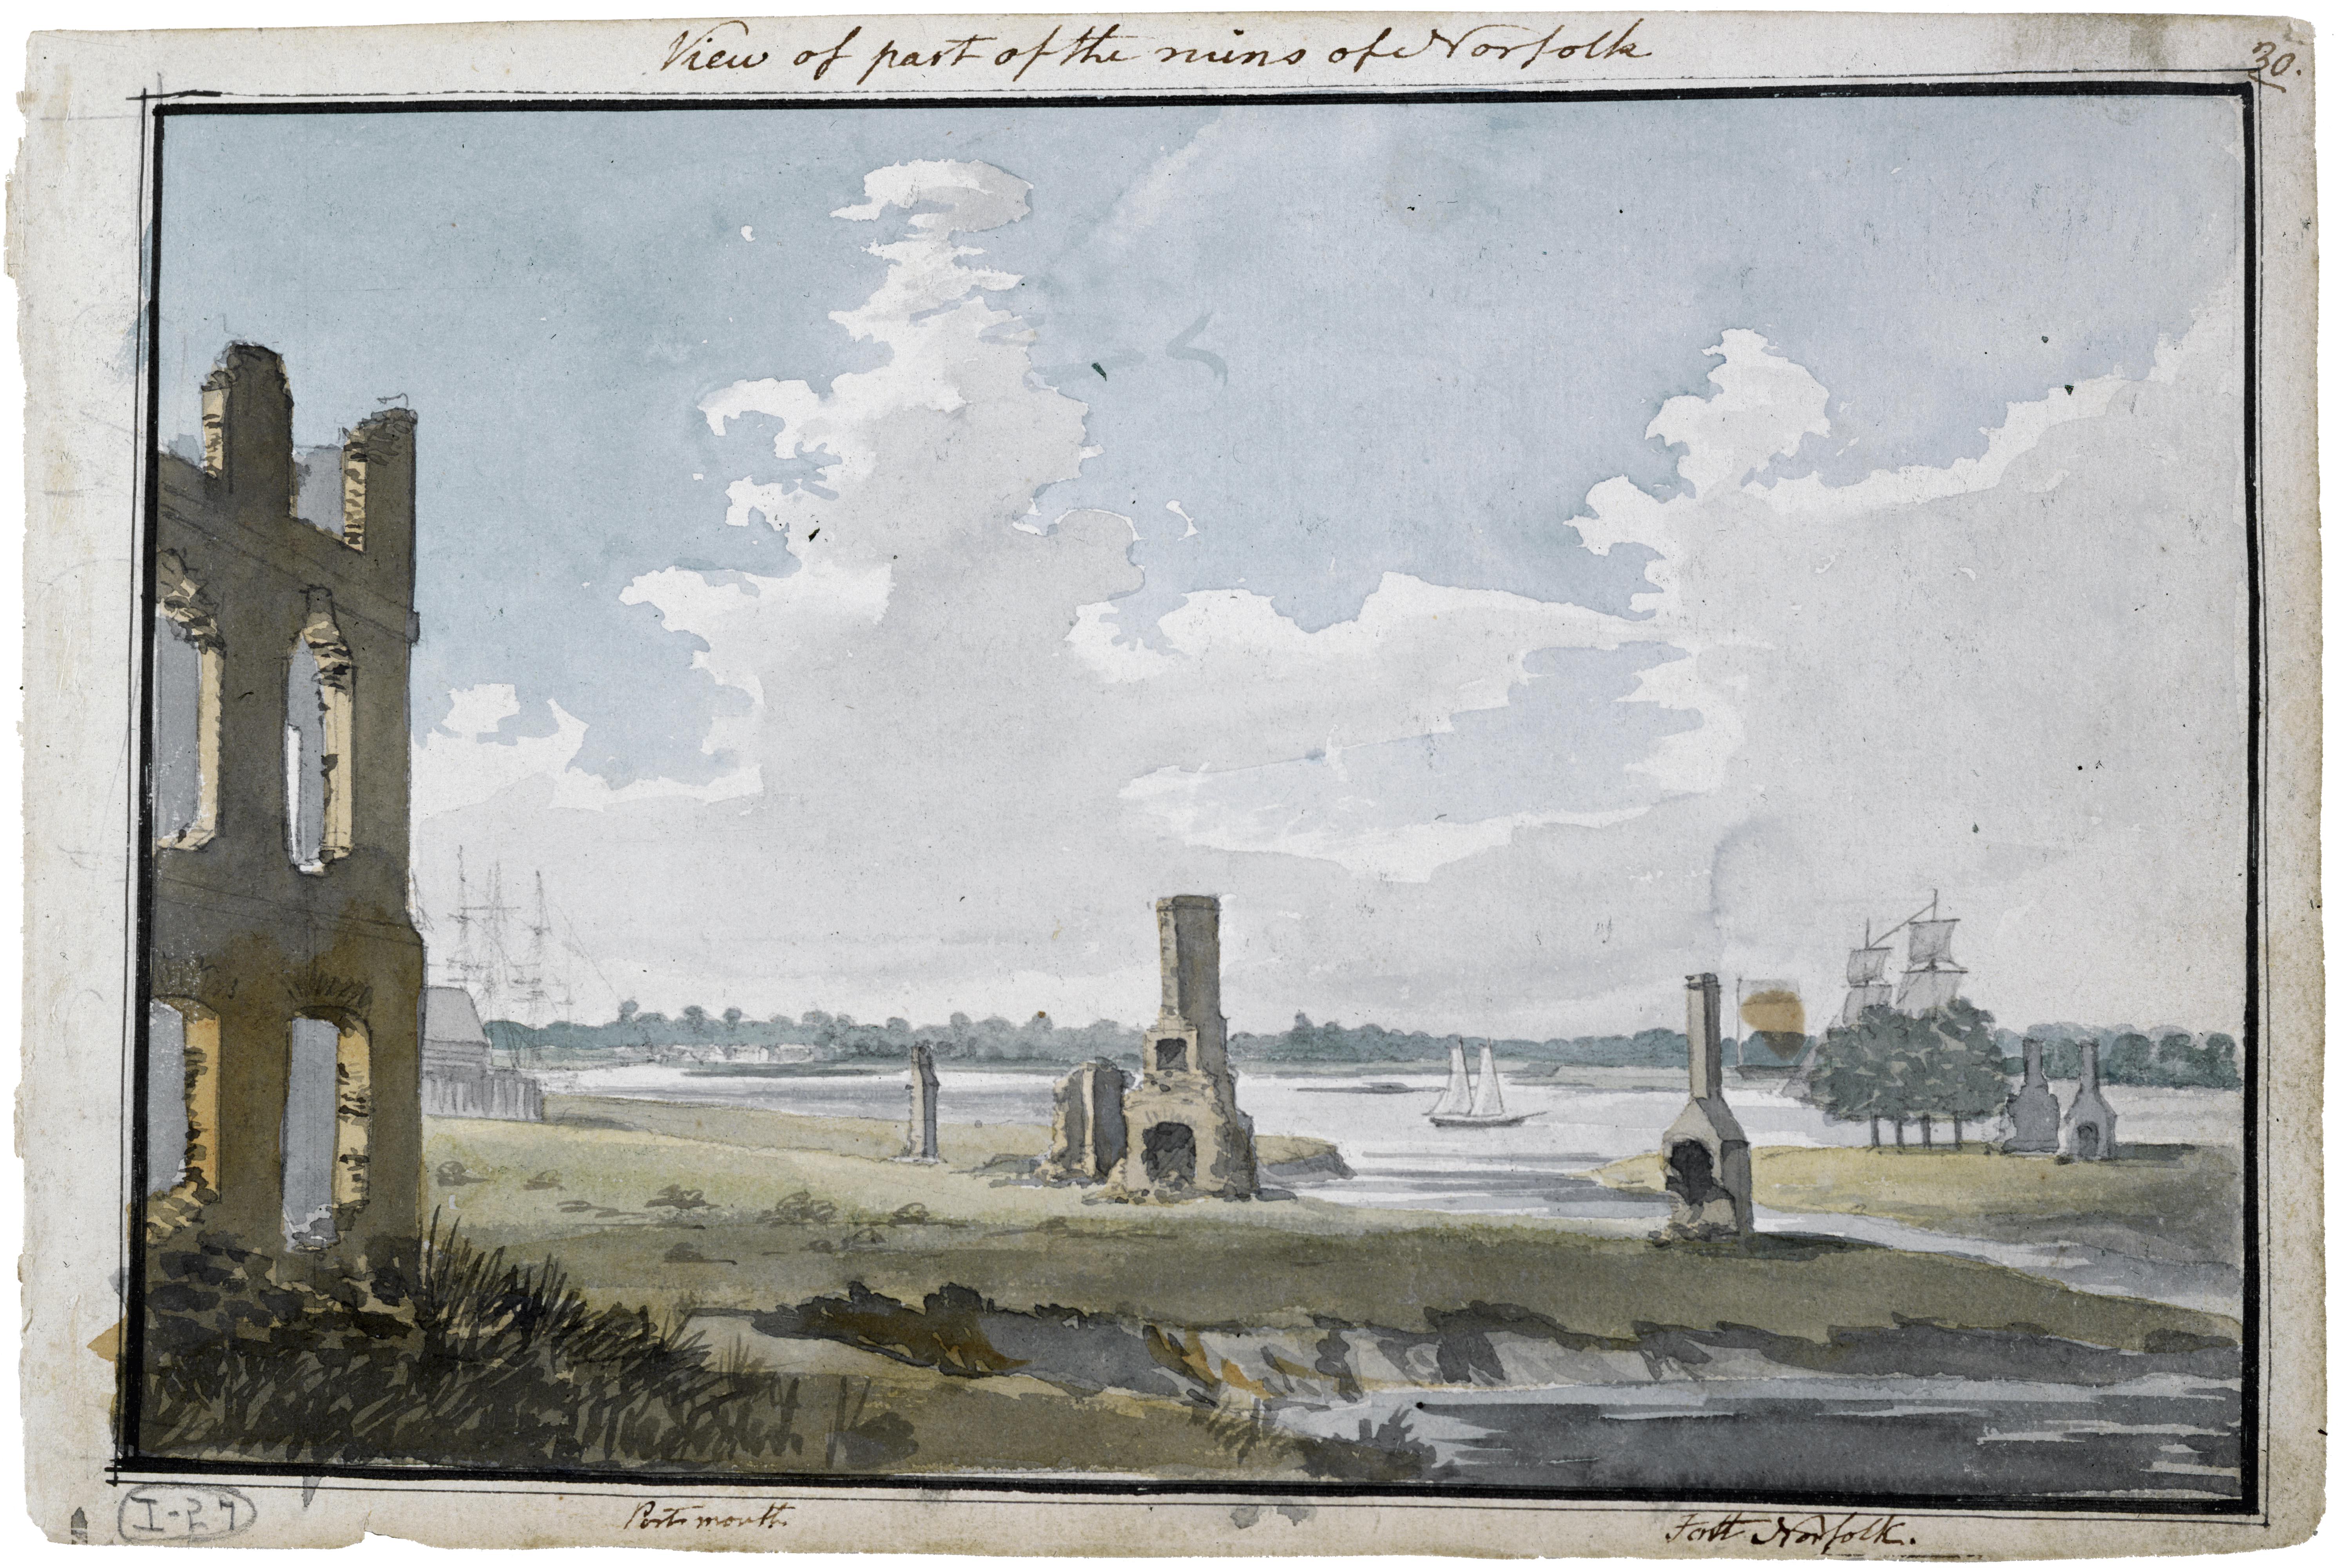 1796–98, watercolour, 17.7 x 26.6 cm. Collection of Maryland Historical Society (1960-108-1-1-27).